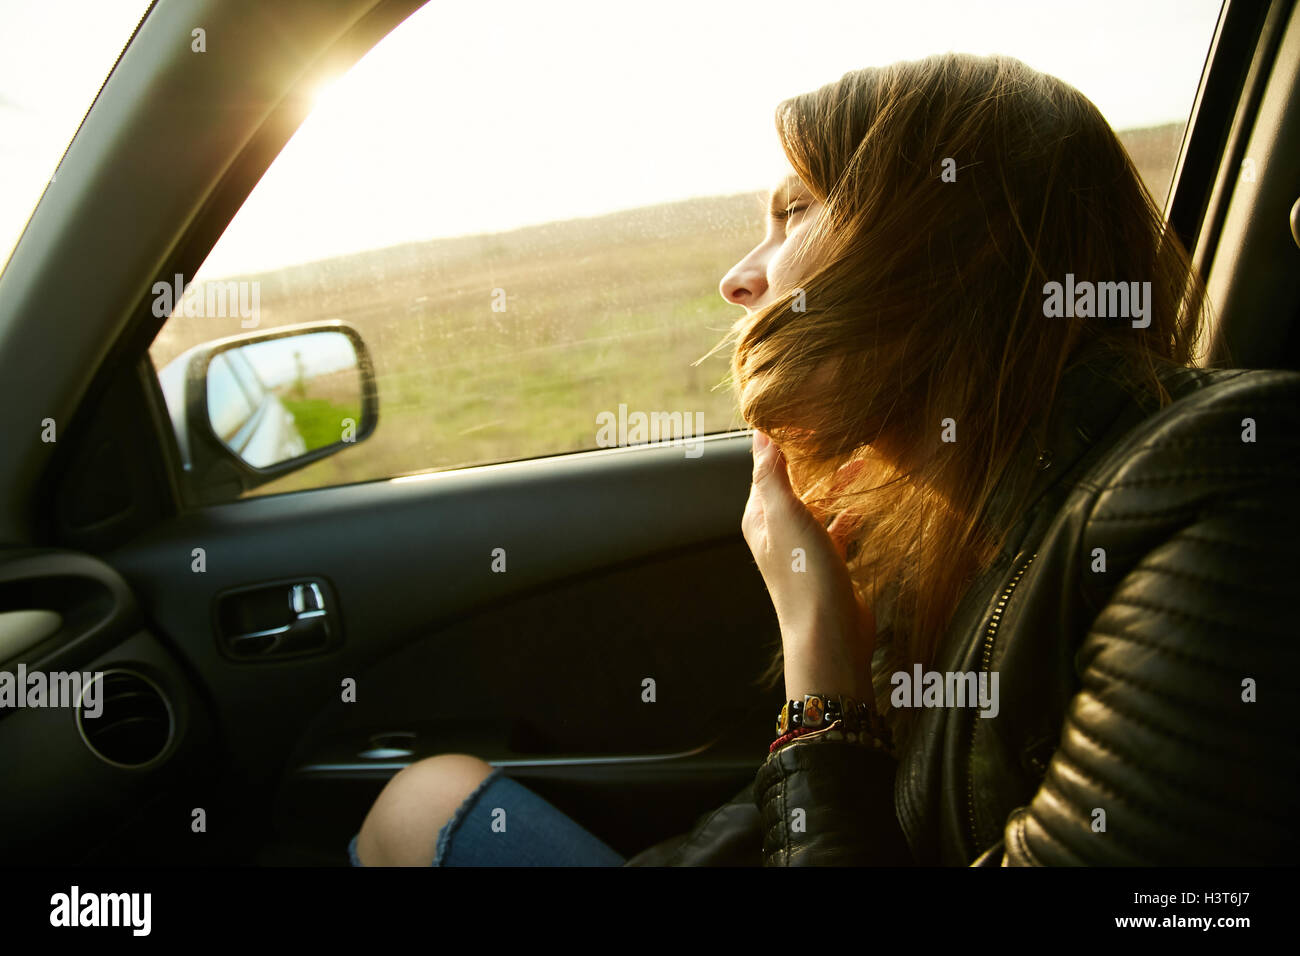 A girl in a leather jacket is looking in the window of a car at a field while travelling Stock Photo